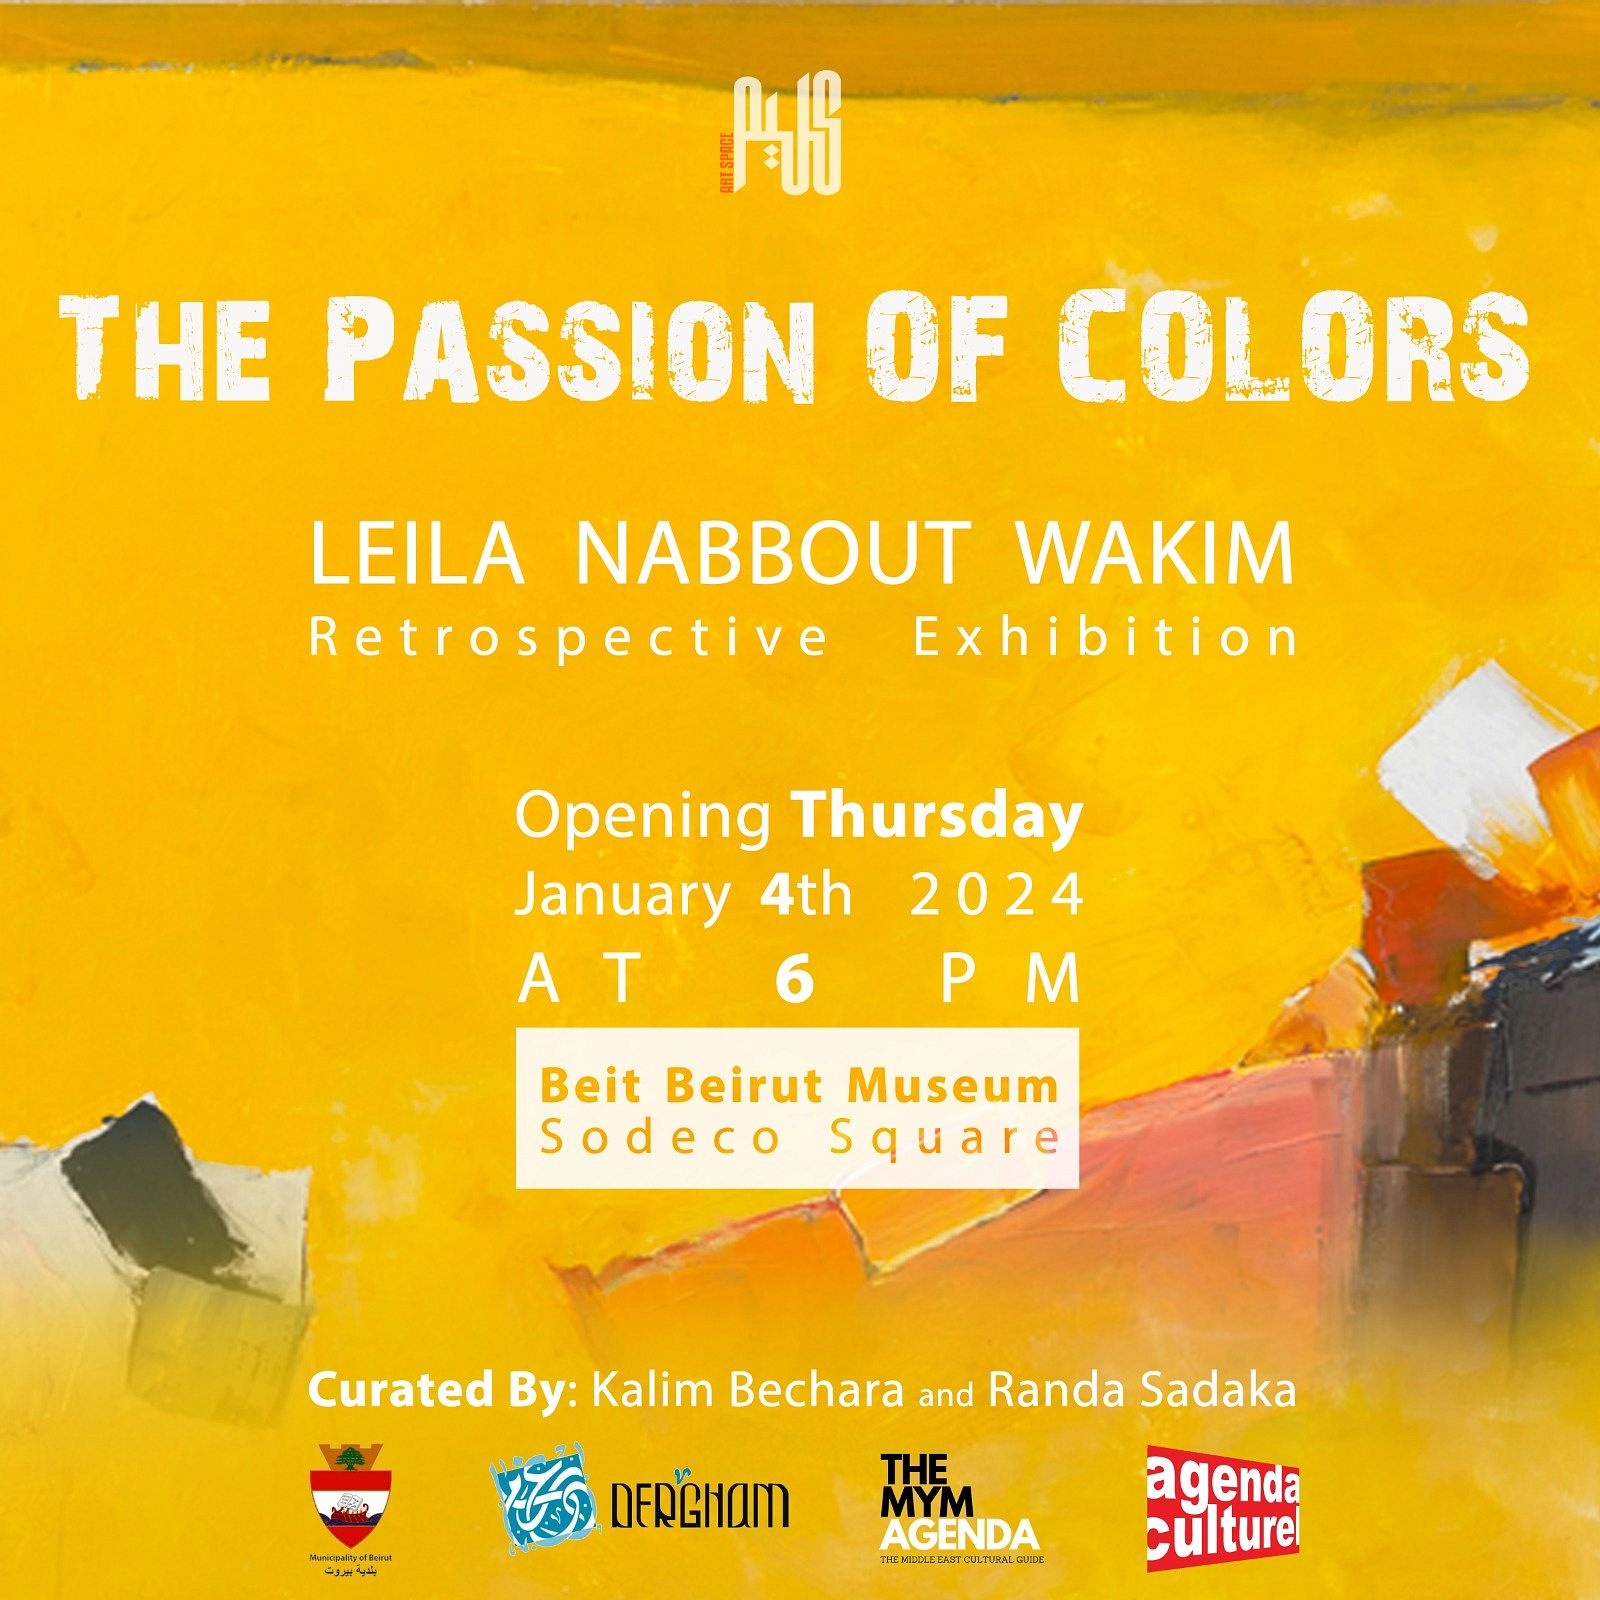 THE PASSION OF COLORS, Leila Nabbout Wakim thumbnail